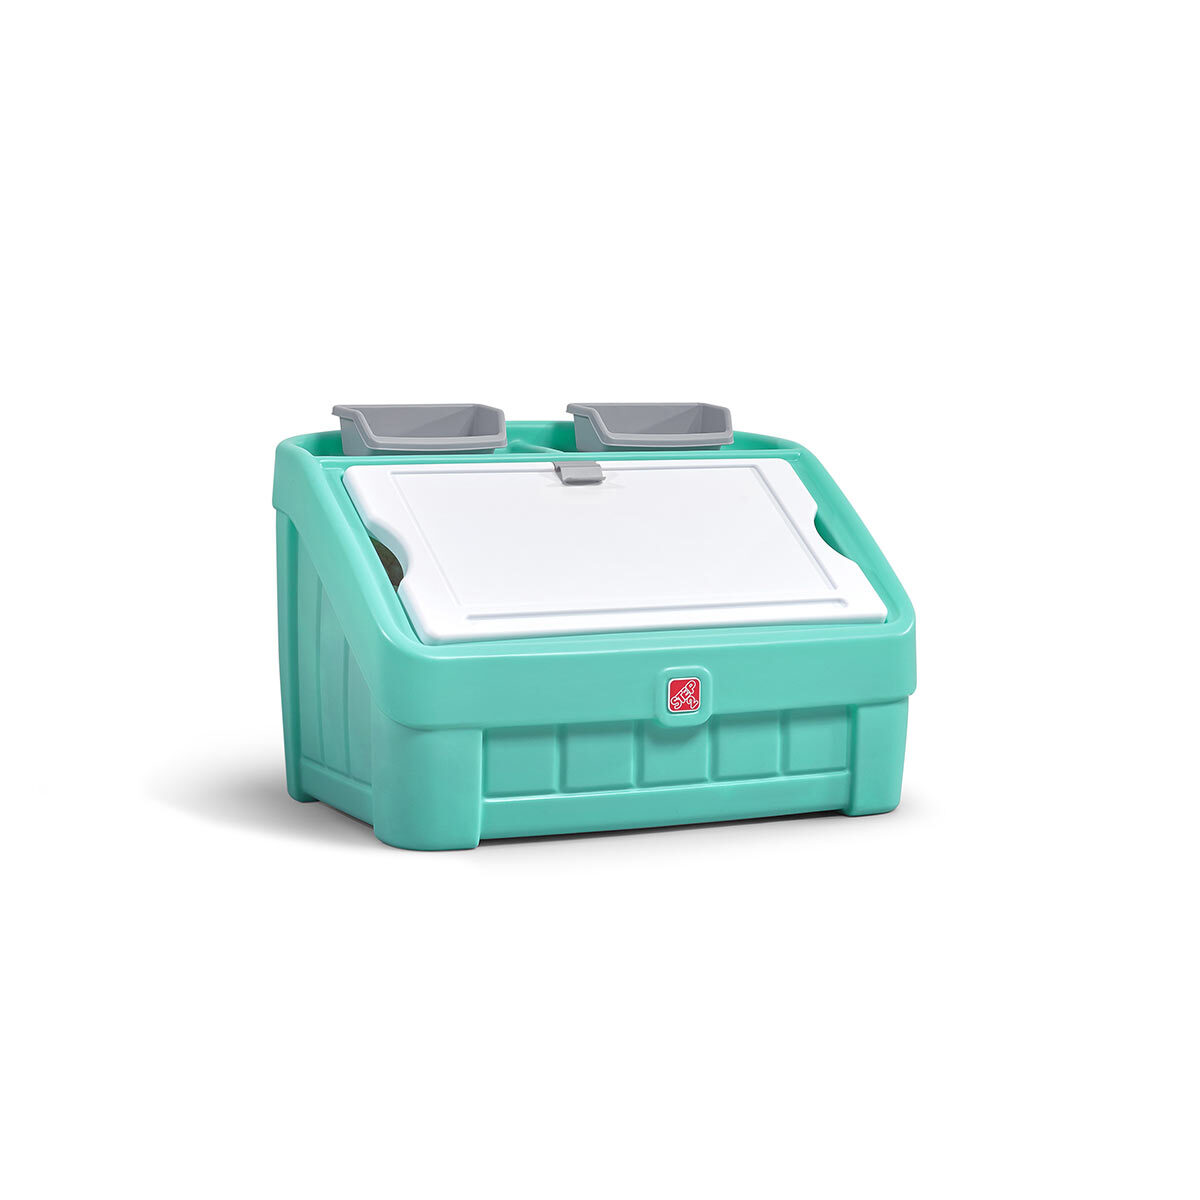 Buy 2-In-1 Toy Box & Art Lid Mint Overview Image at Costco.co.uk